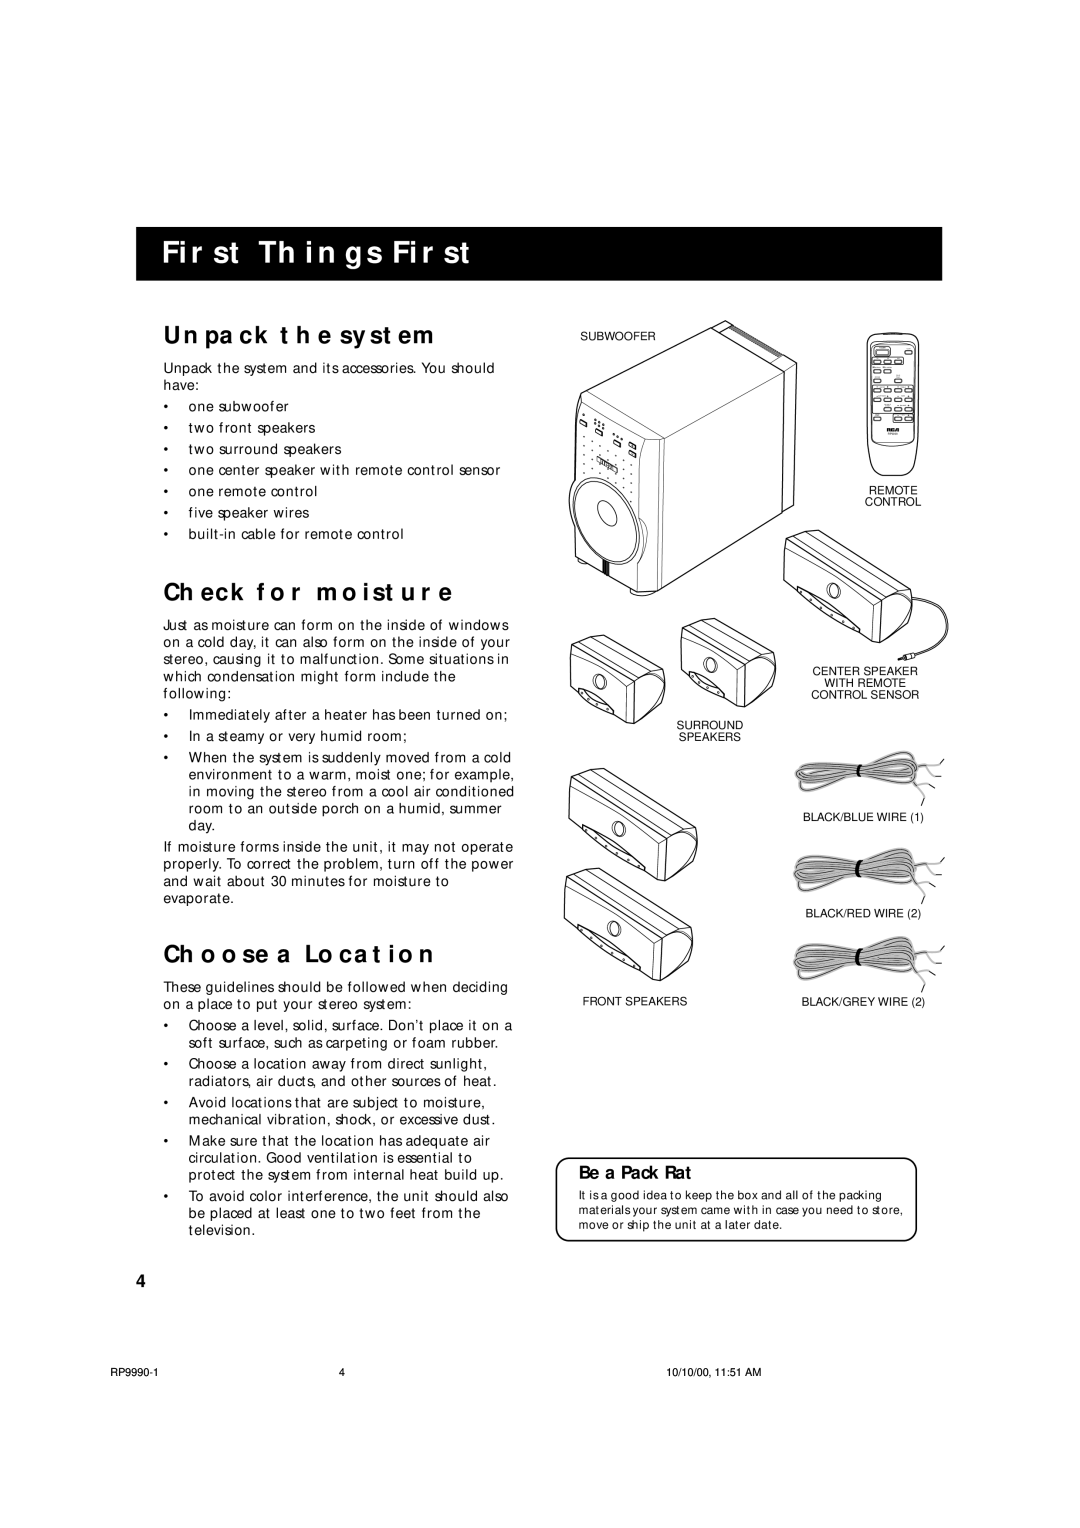 RCA RP-9990 manual First Things First, Unpack The System, Check For Moisture, Choose A Location, Be a Pack Rat 